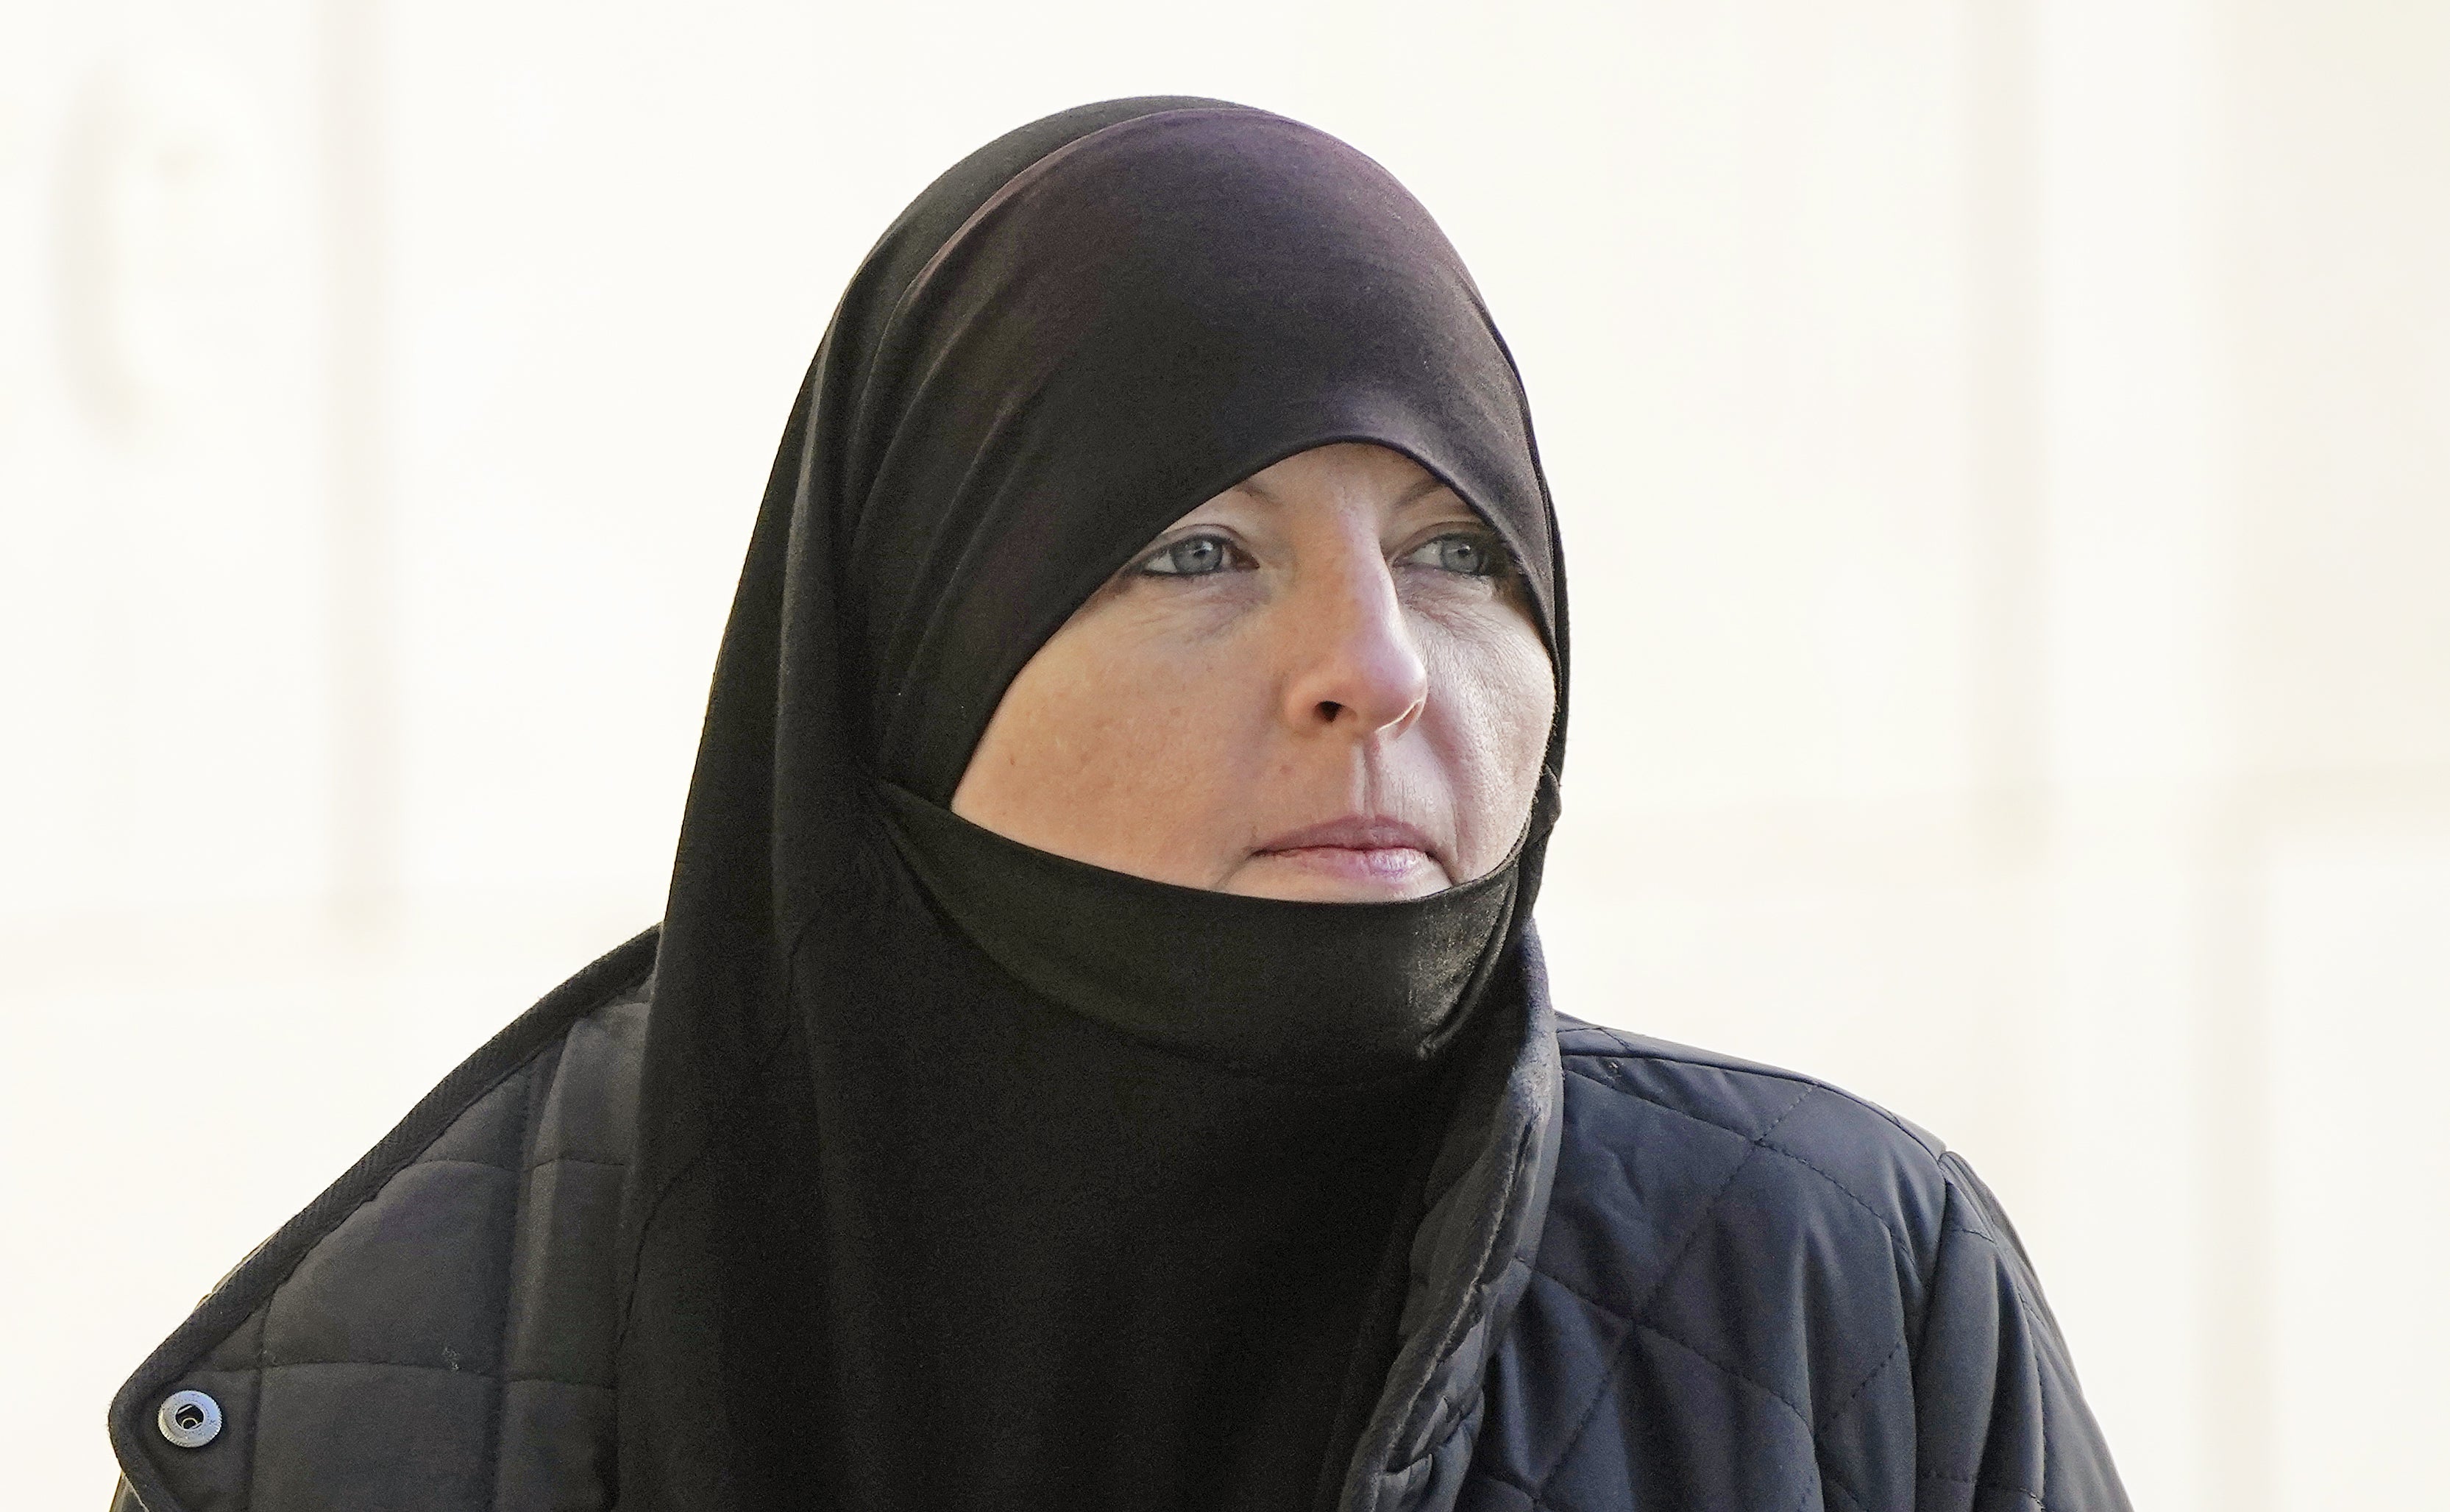 Former member of the Defence Forces Lisa Smith is facing terror-related charges (Niall Carson/PA)